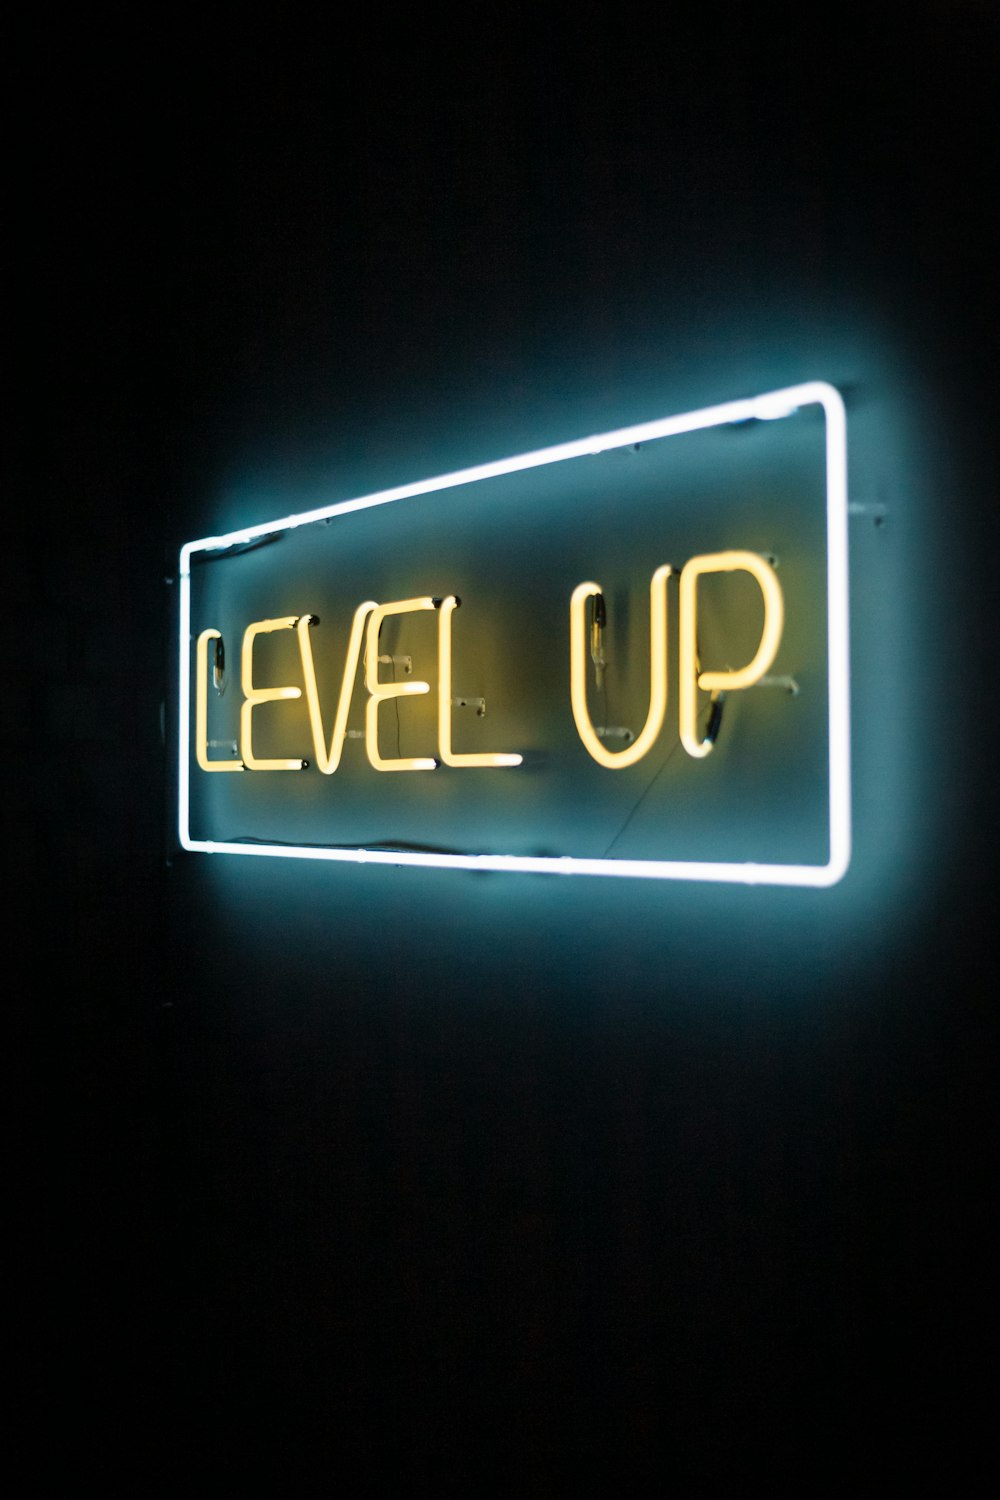 yellow and white level up LED lights